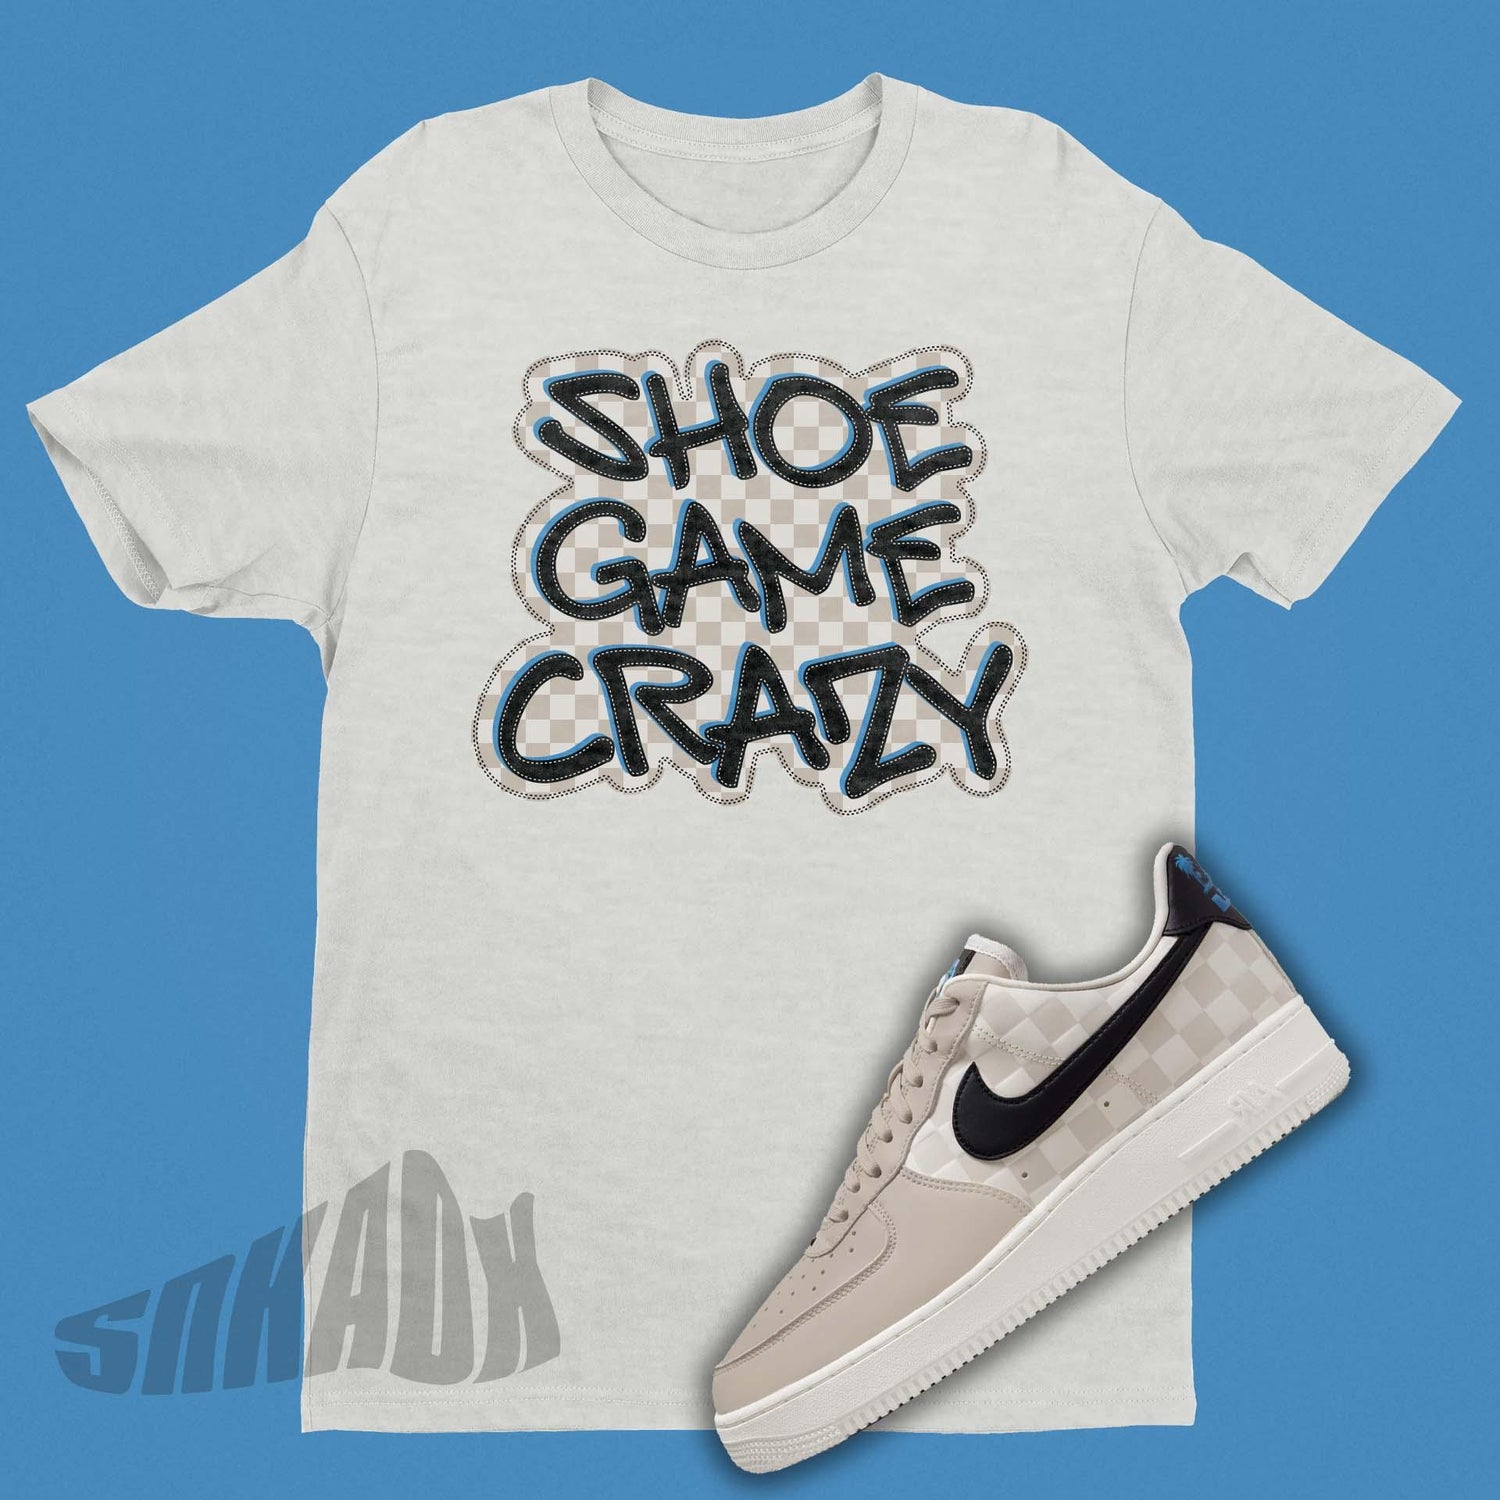 Shoe Game Crazy Shirt To Match Nike Air Force 1 King's Day Chess Board print King Chess Piece